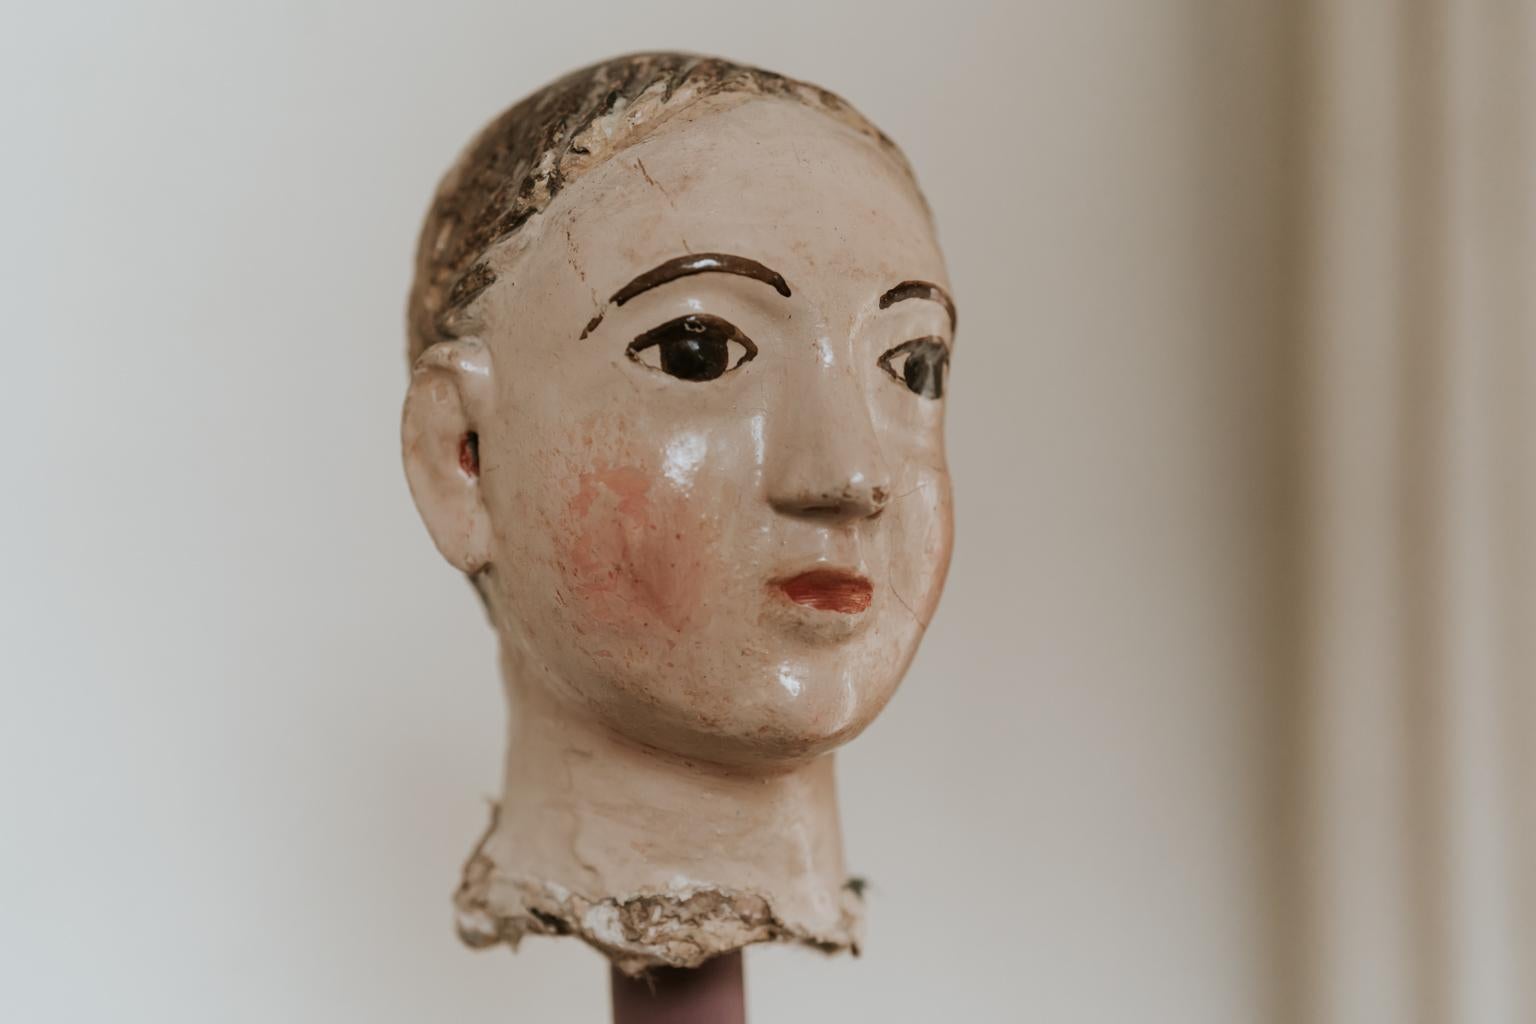 This is an 18th century polychromed terra cotta head of a Santos figure ... Spanish origin ...
on contemporary wooden base ... dimensions are 17 cm high when mounted on base 32 cm.